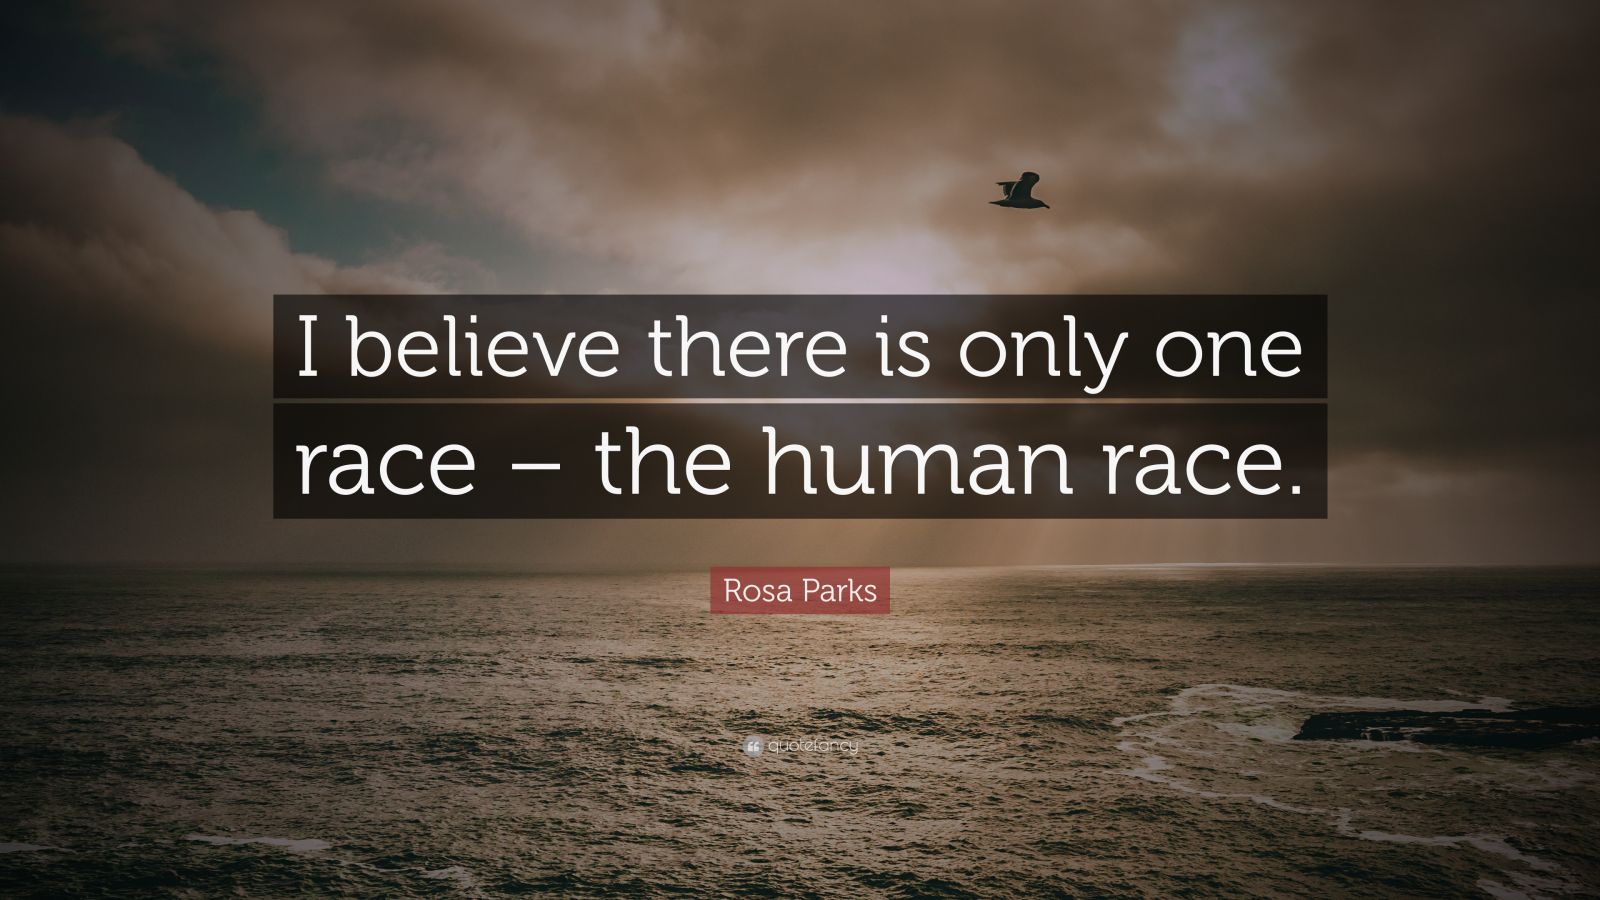 Rosa Parks Quote “I believe there is only one race the human race